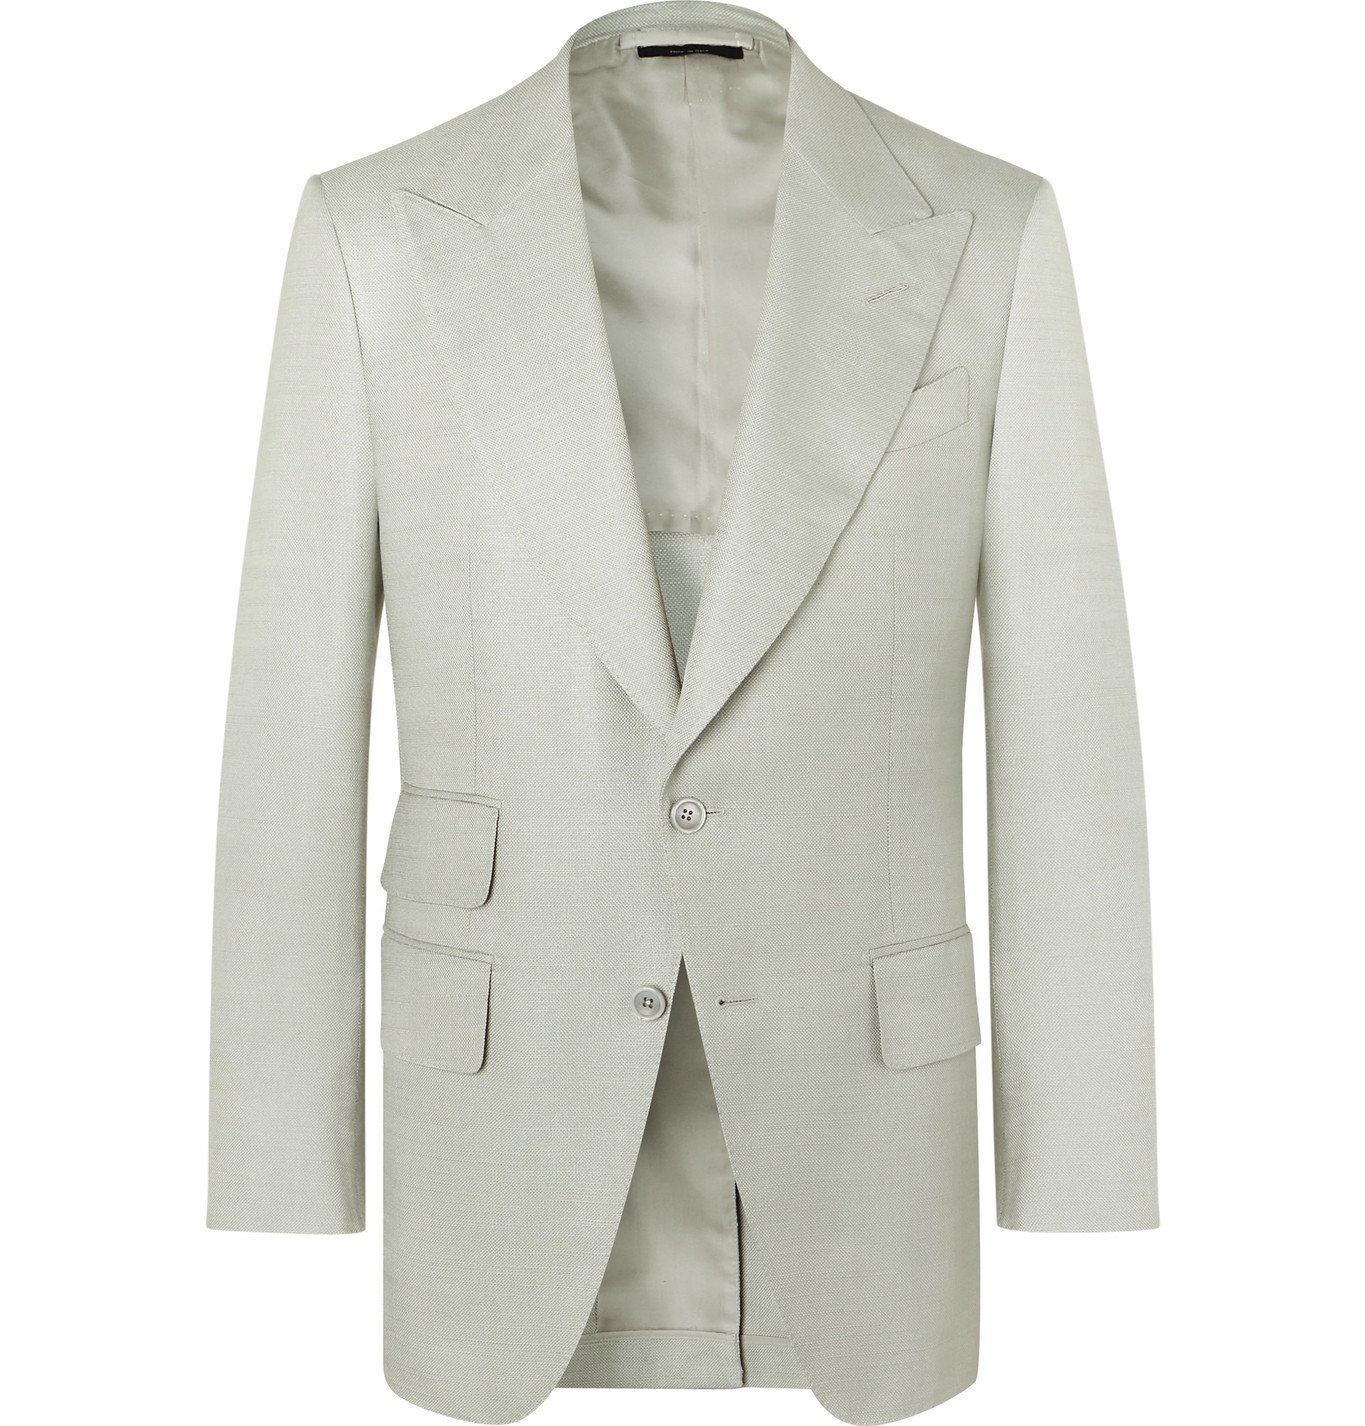 TOM FORD - Atticus Slim-Fit Silk Suit Jacket - Gray TOM FORD